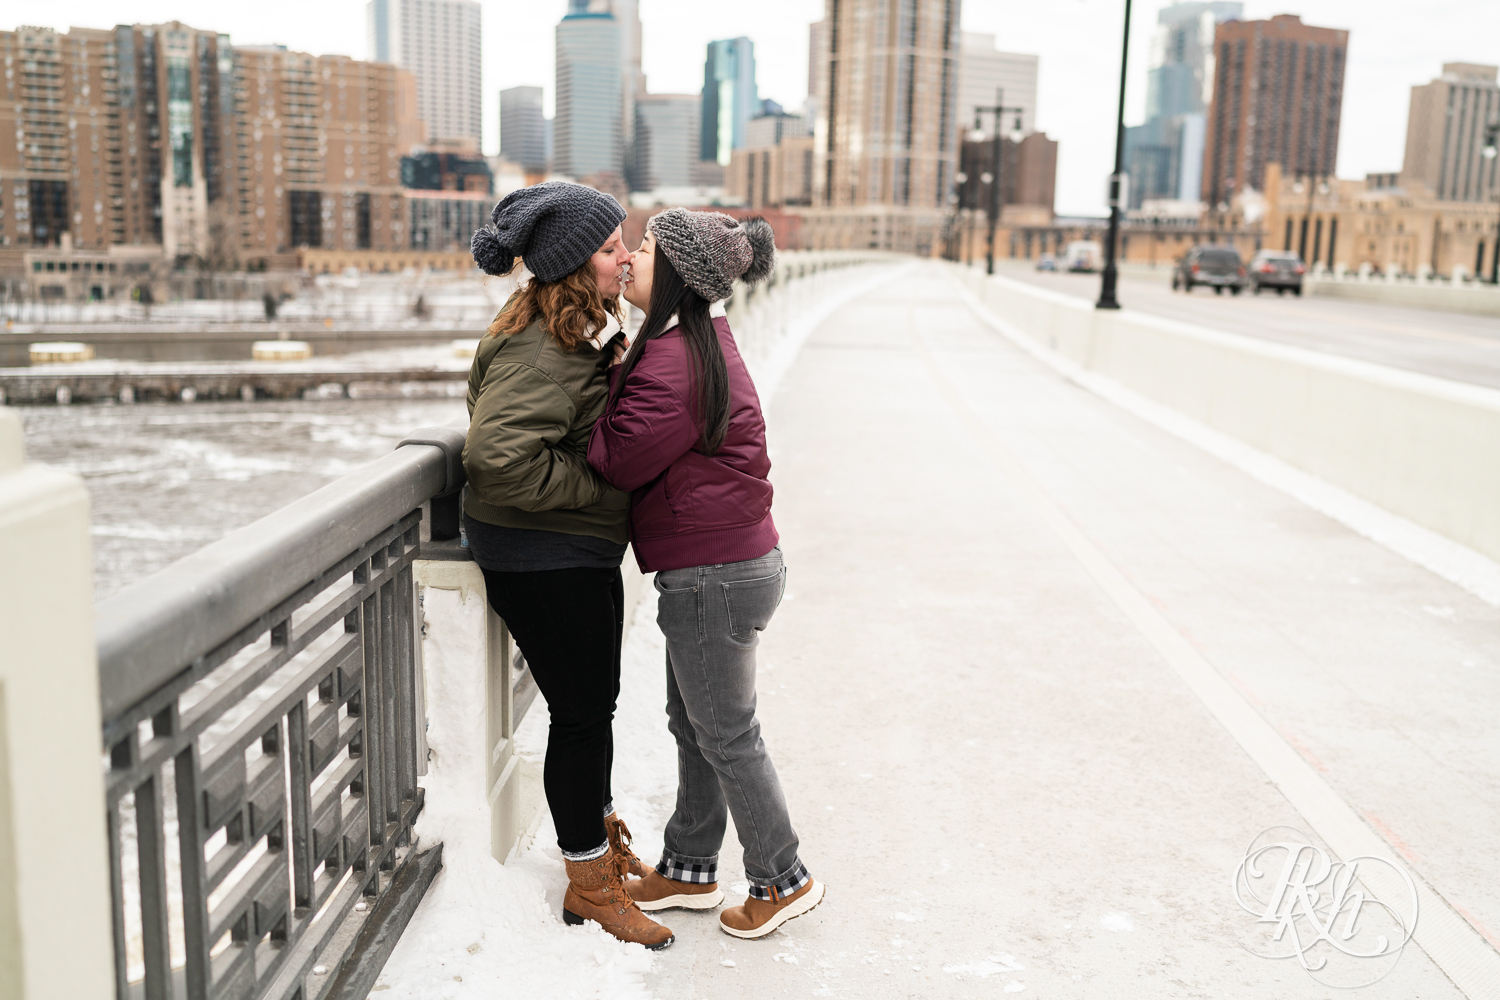 Red headed woman and Asian woman in jackets kiss on Third Street Bridge during winter engagement photography in Minneapolis, Minnesota.